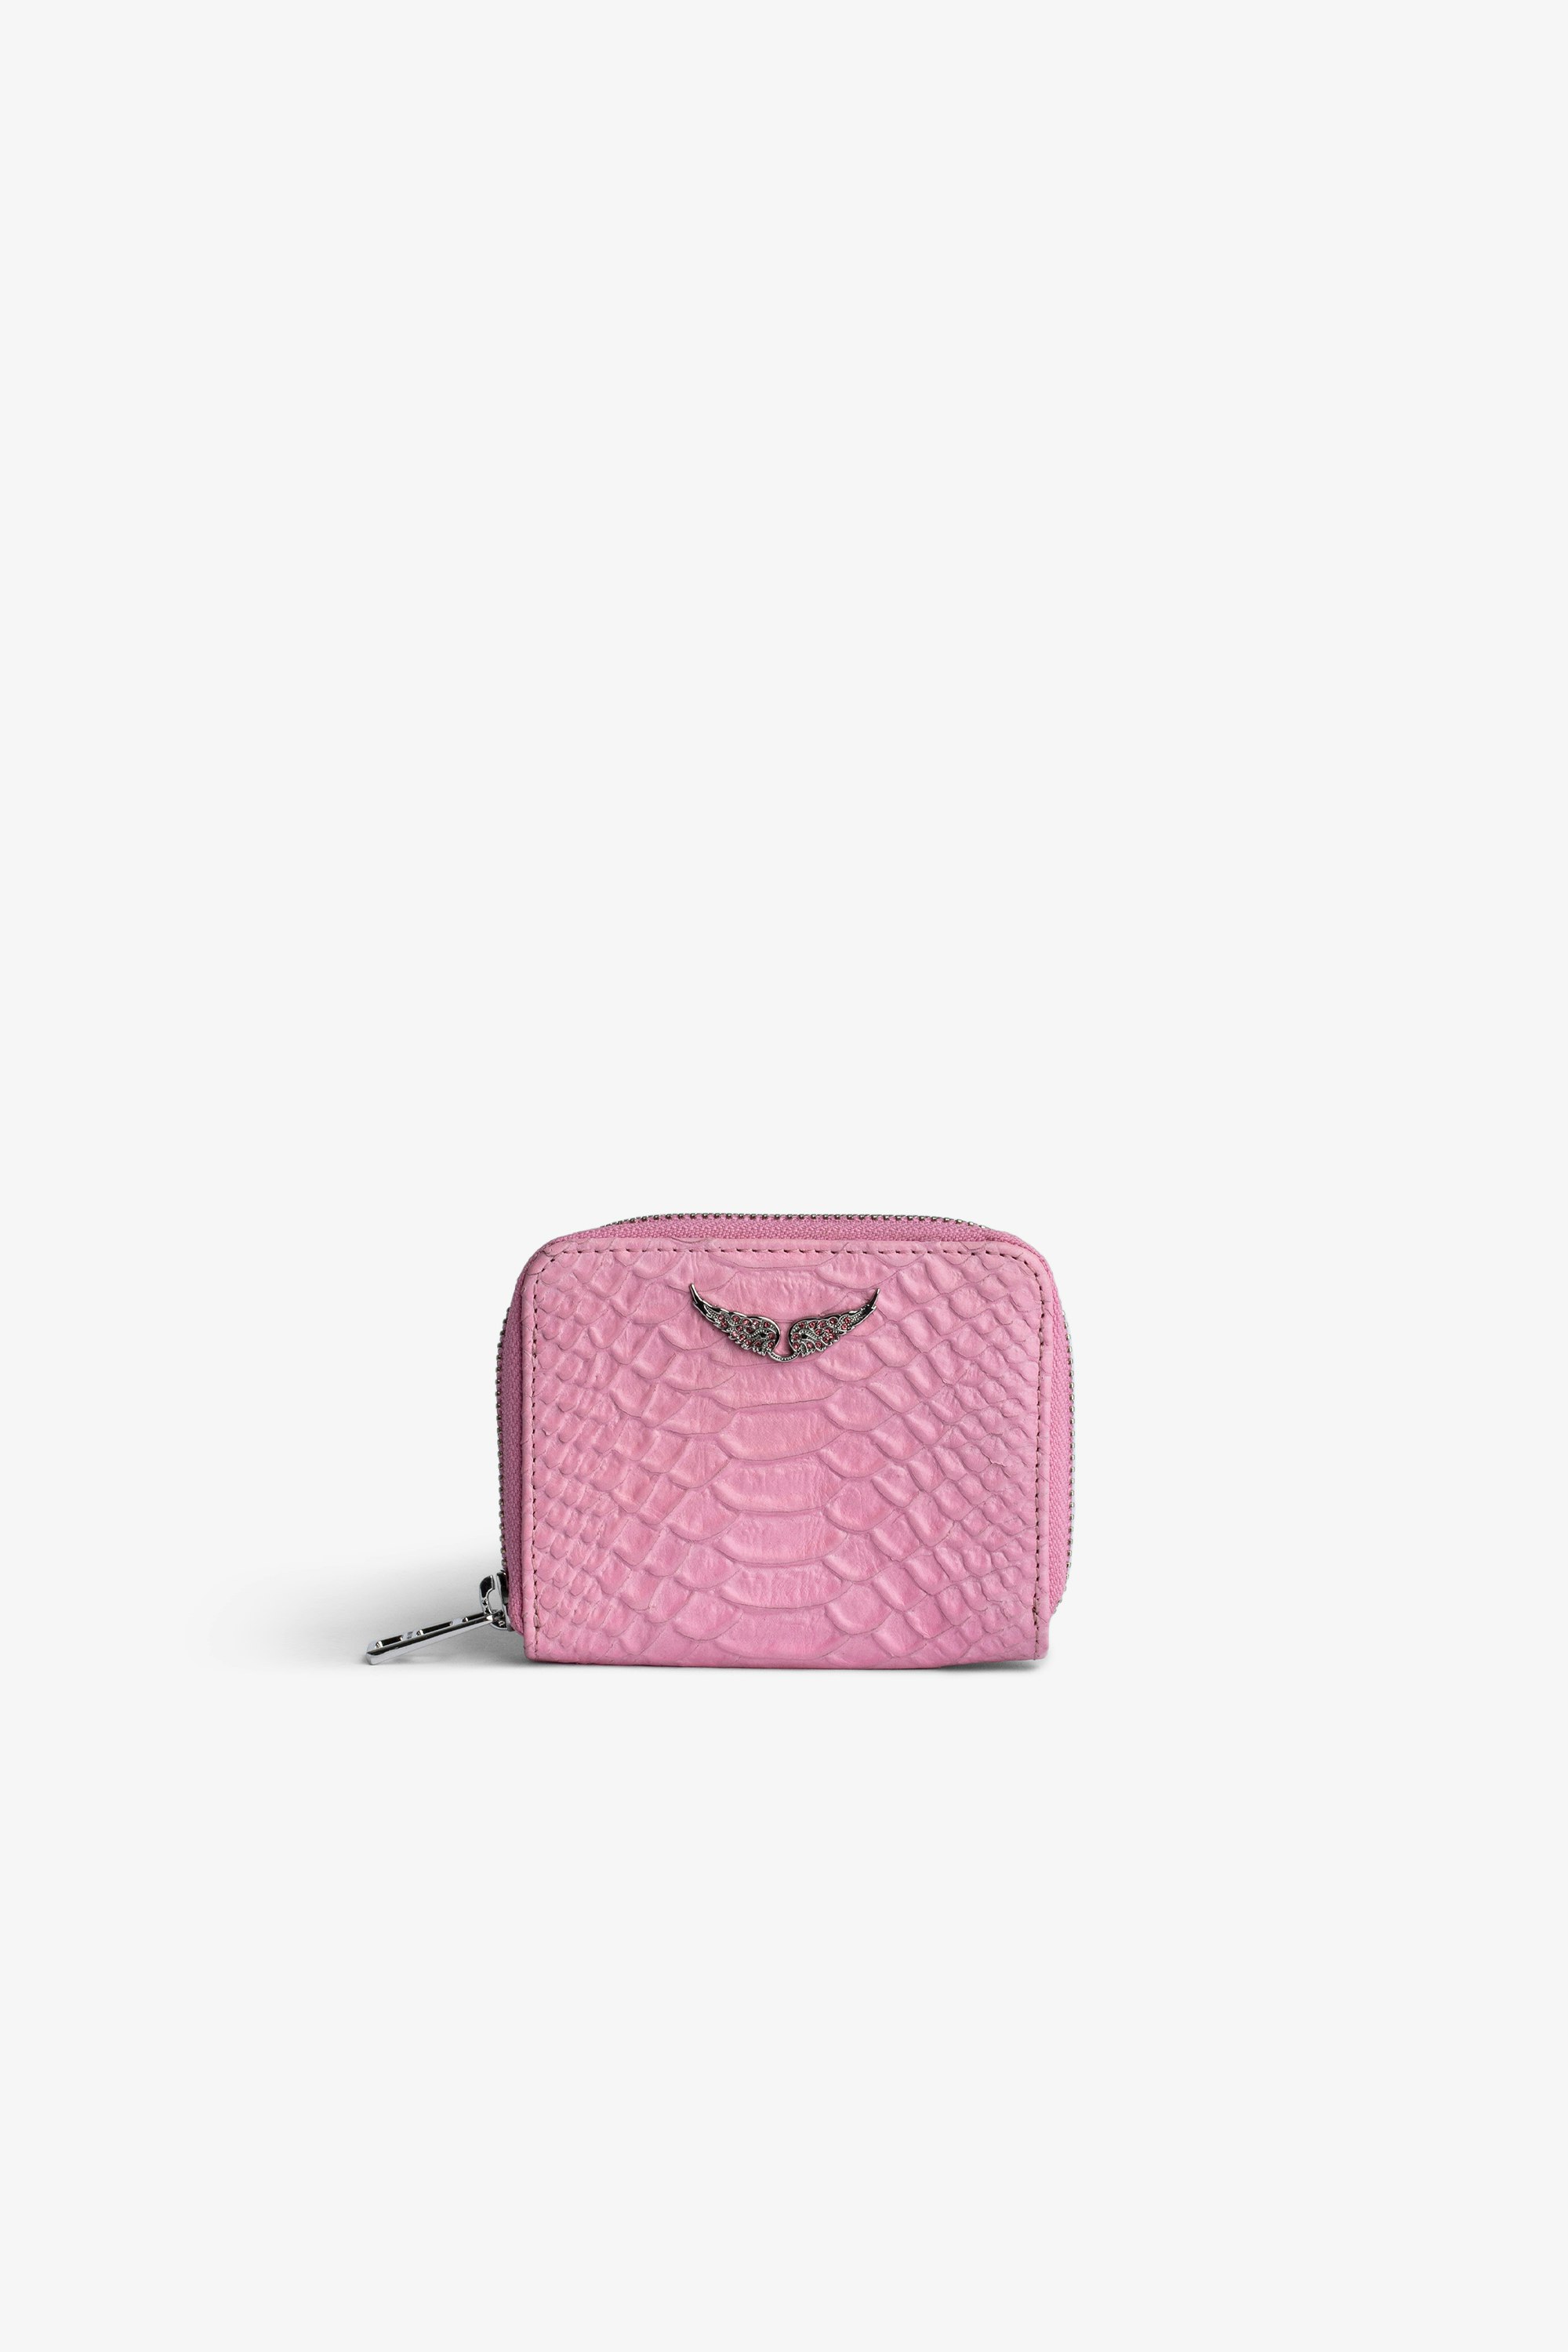 Mini ZV Savage Coin Purse Women’s coin purse in pink python-effect leather